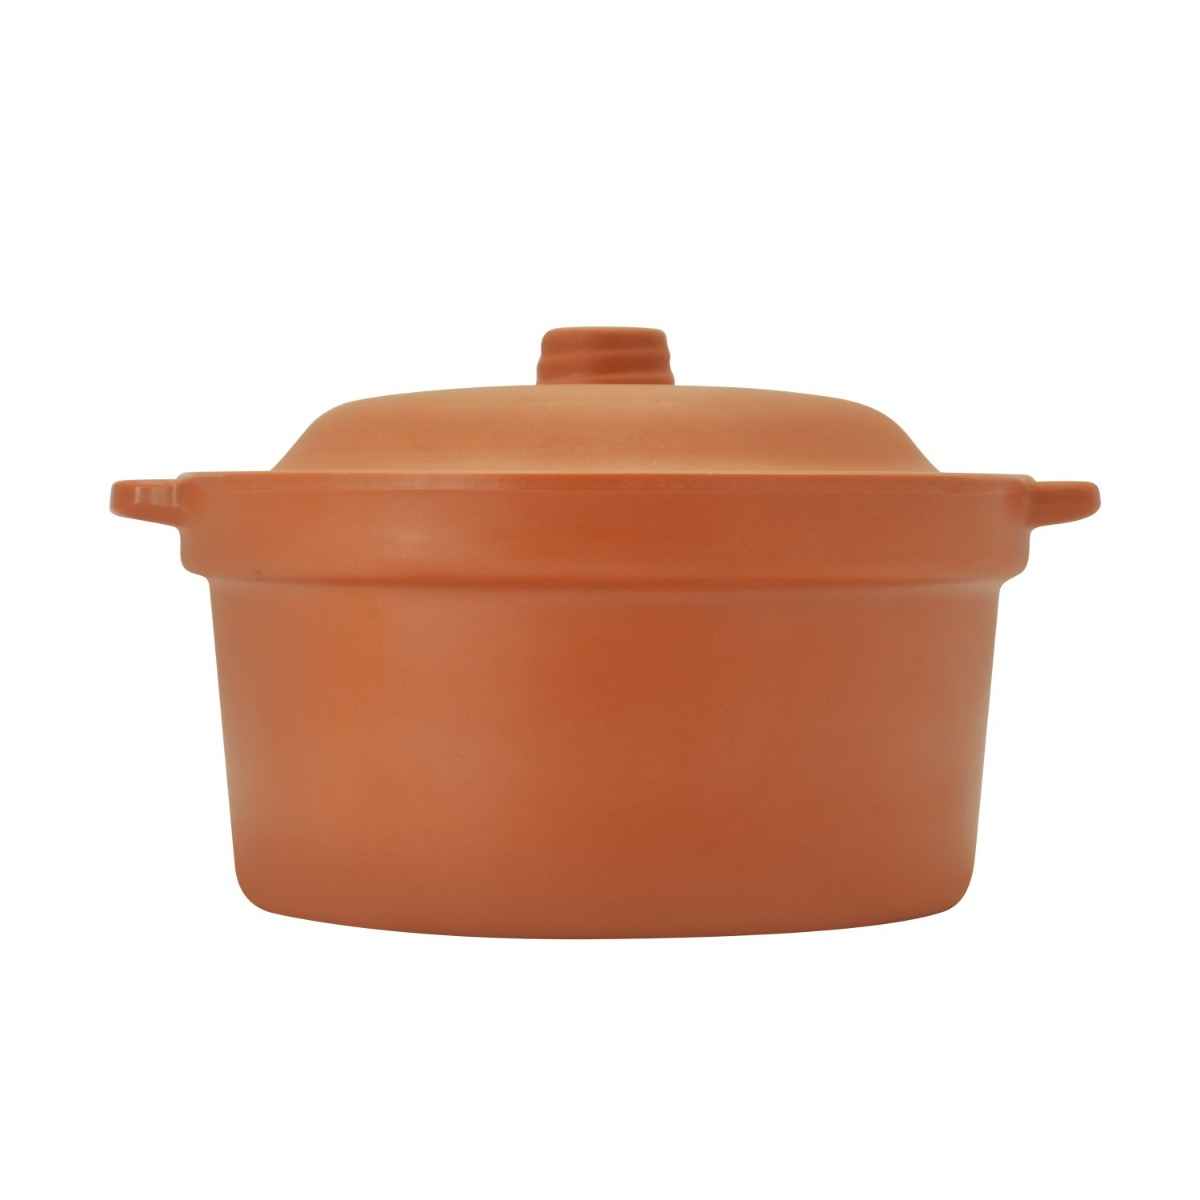 Dinewell Melamine Terracota Serving Bowl With Lid